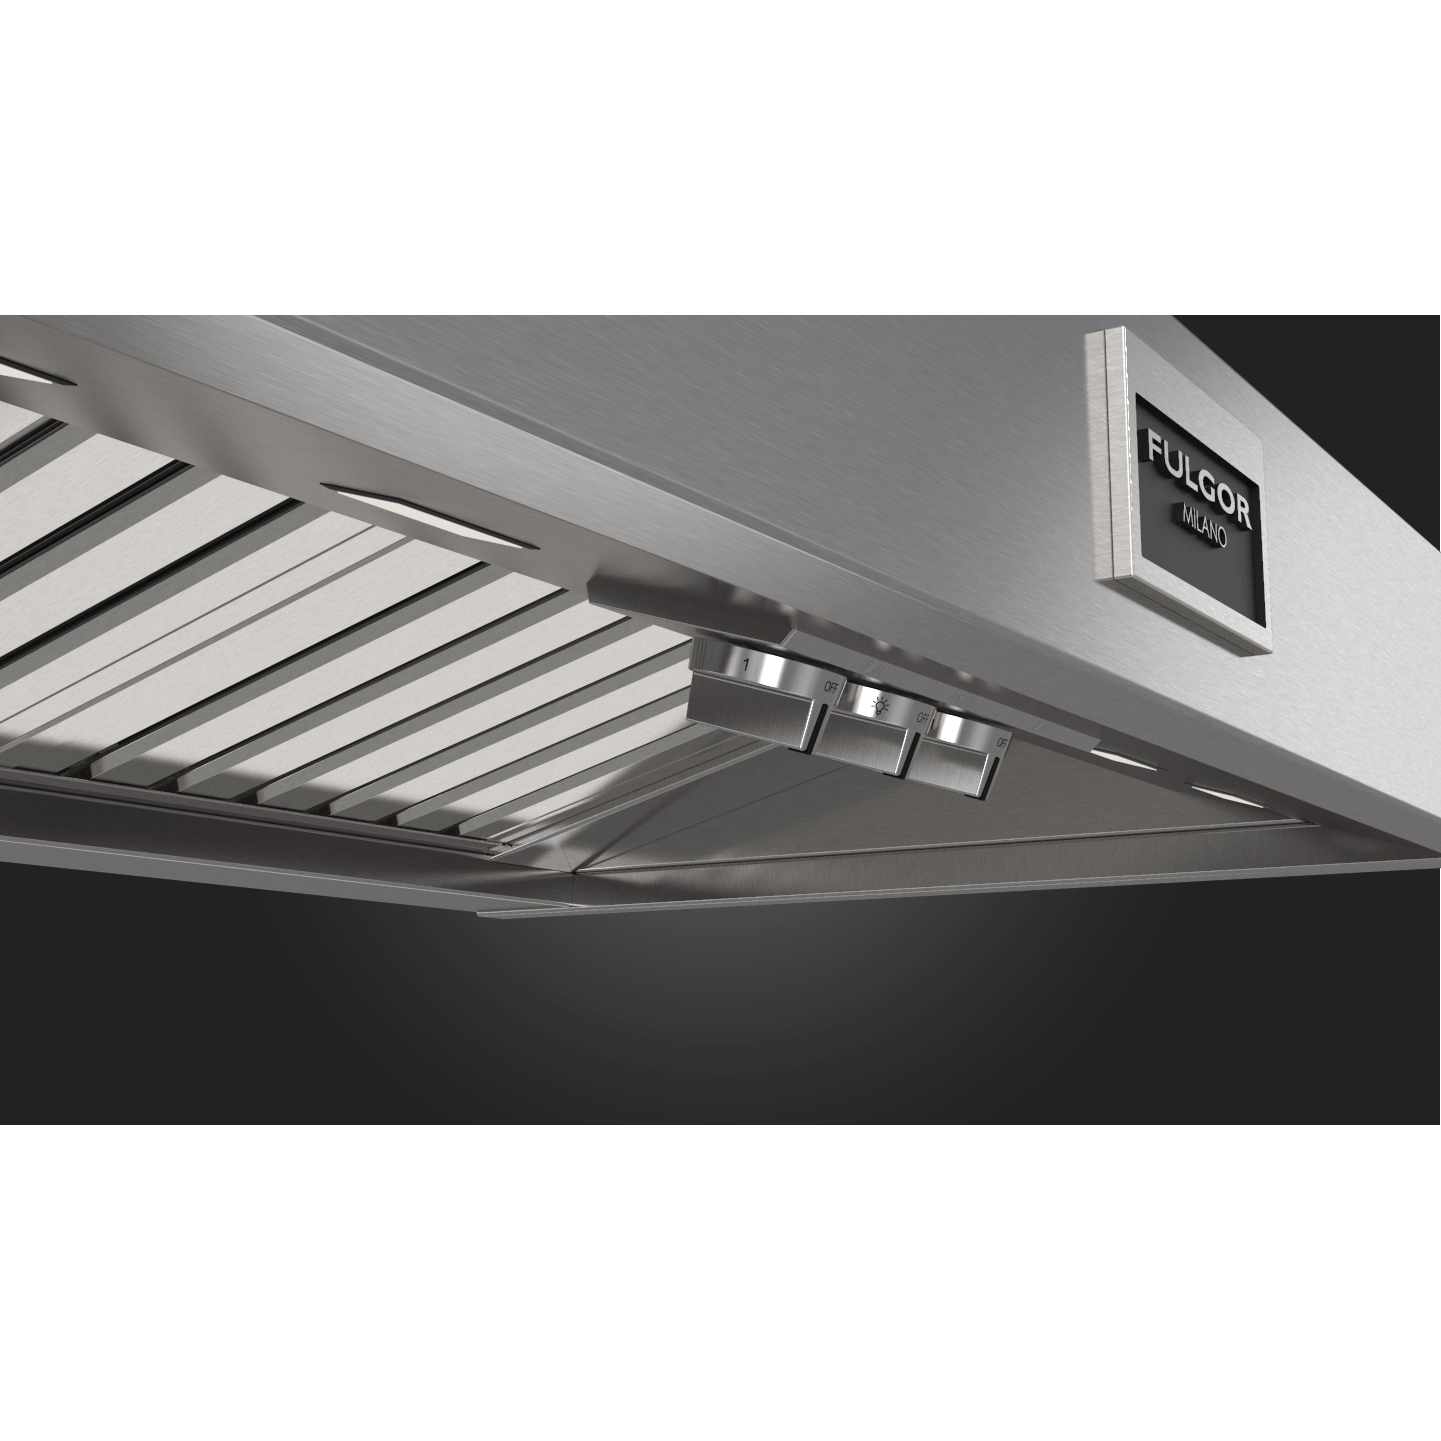 Fulgor Milano 36" Wall Mount Range Hood with 1,000 CFM Blower, Stainless Steel - F6PC36DS1 Hoods F6PC36DS1 Luxury Appliances Direct